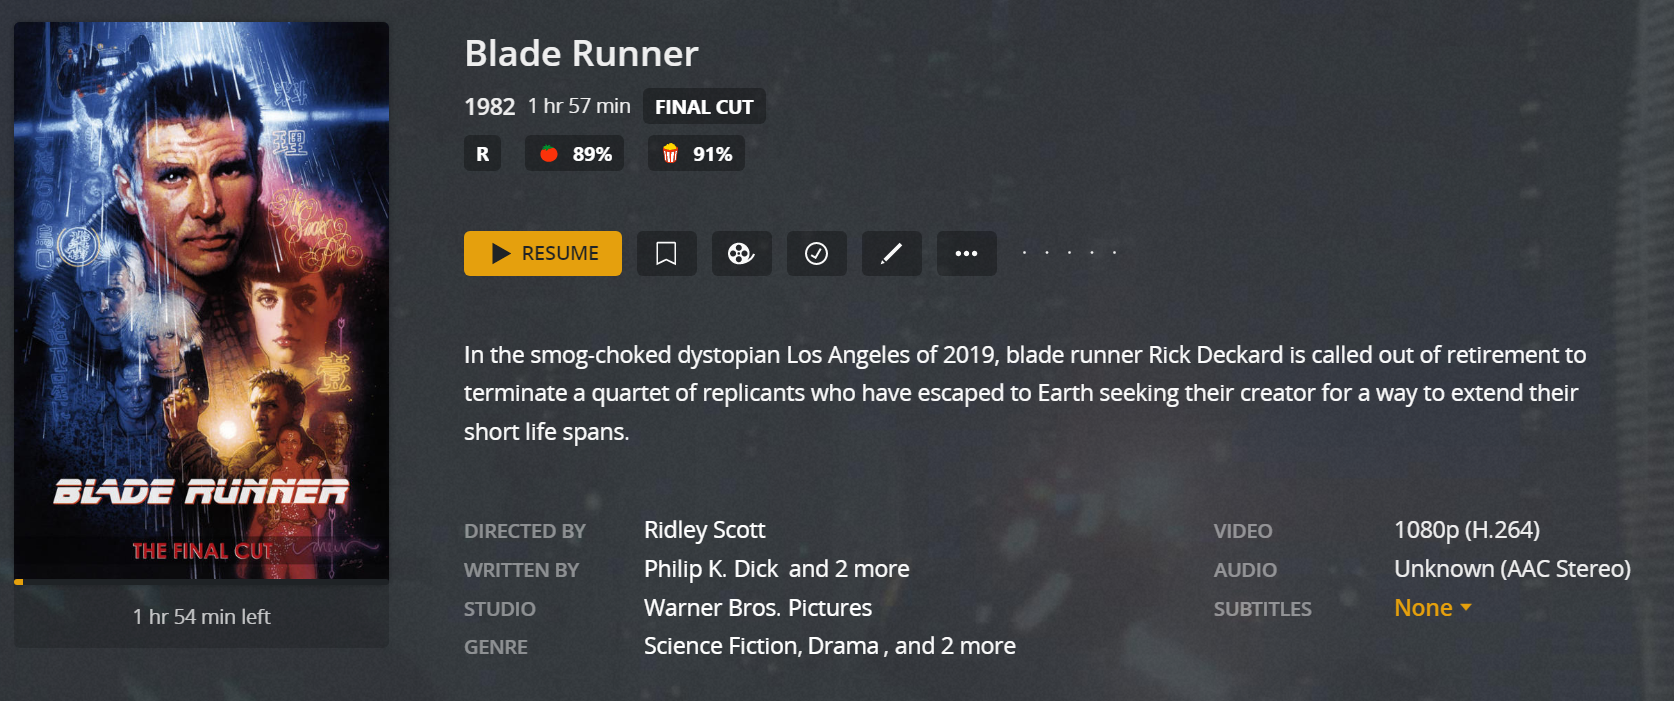 Details page for a 'Final Cut' edition of the movie Blade Runner, showing the 'Final Cut' Edition tag displayed.